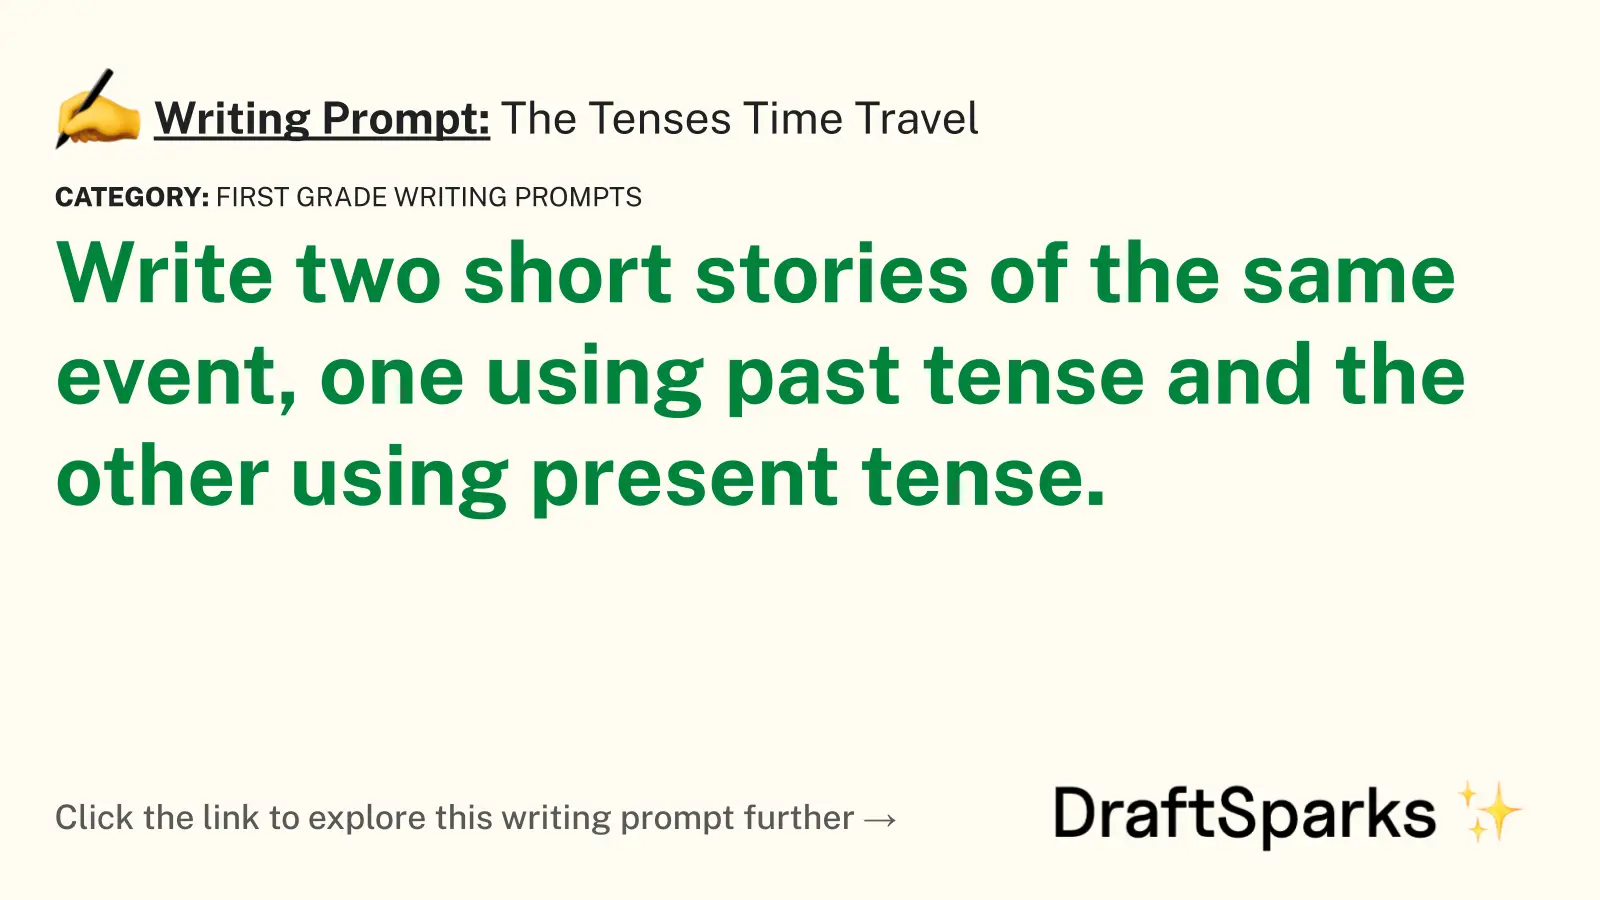 The Tenses Time Travel